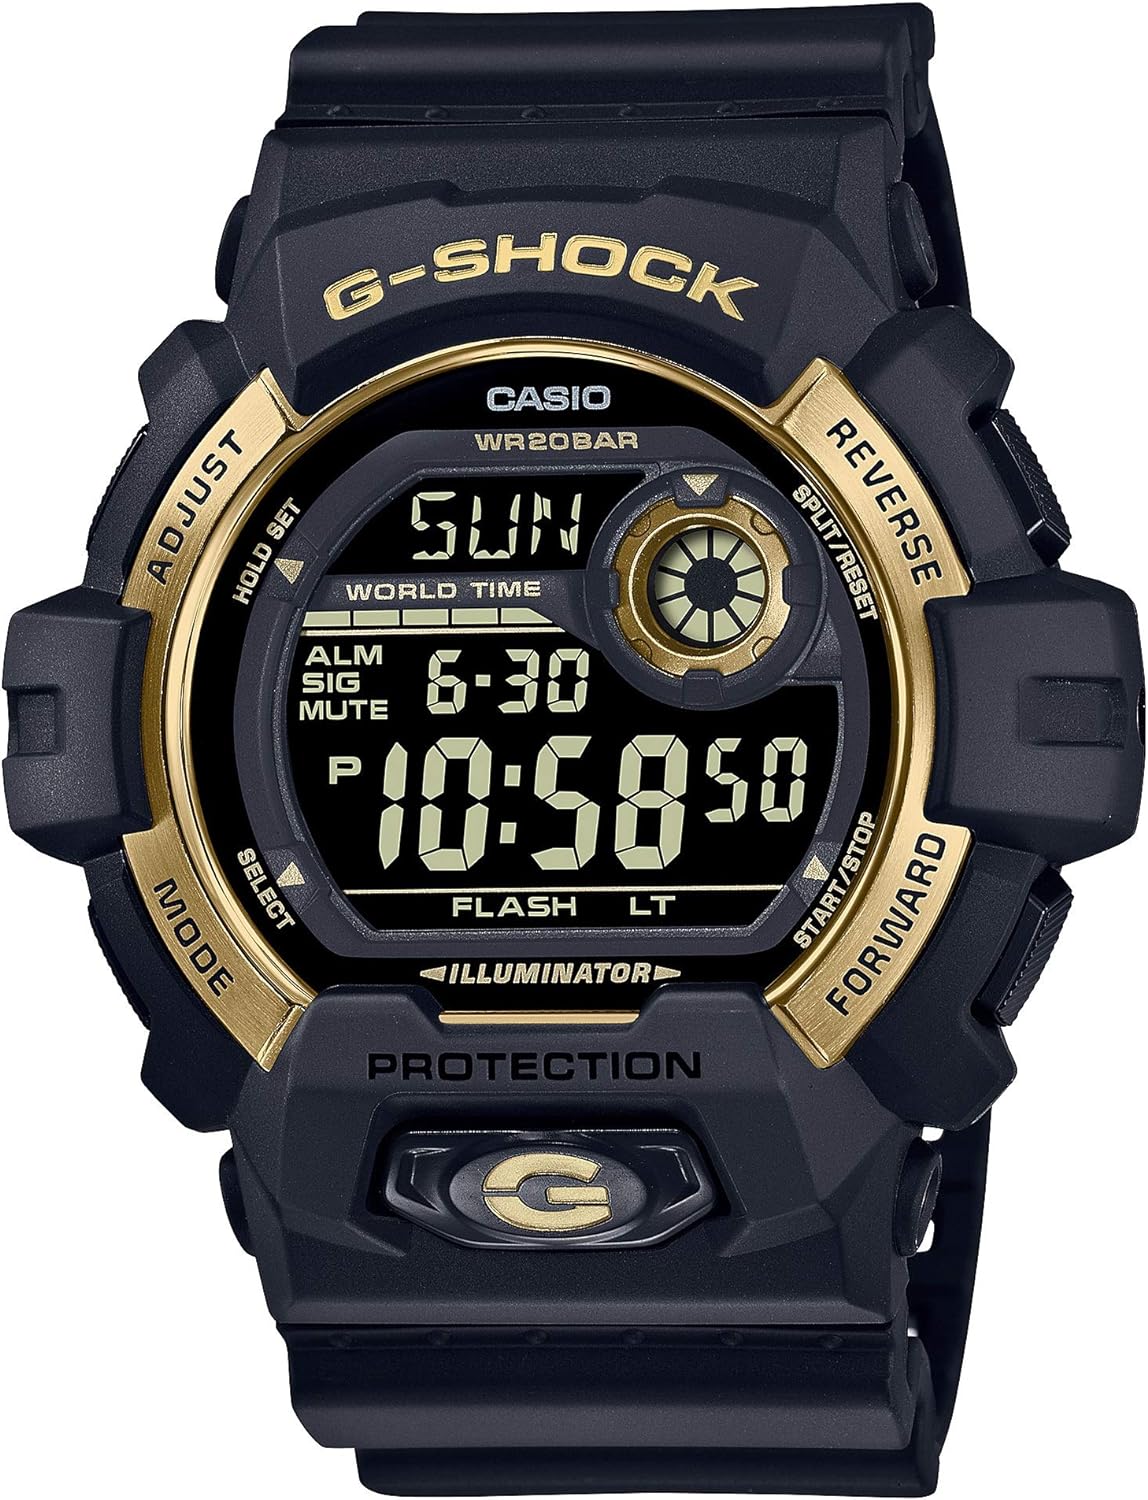 Review Summary of G-Shock